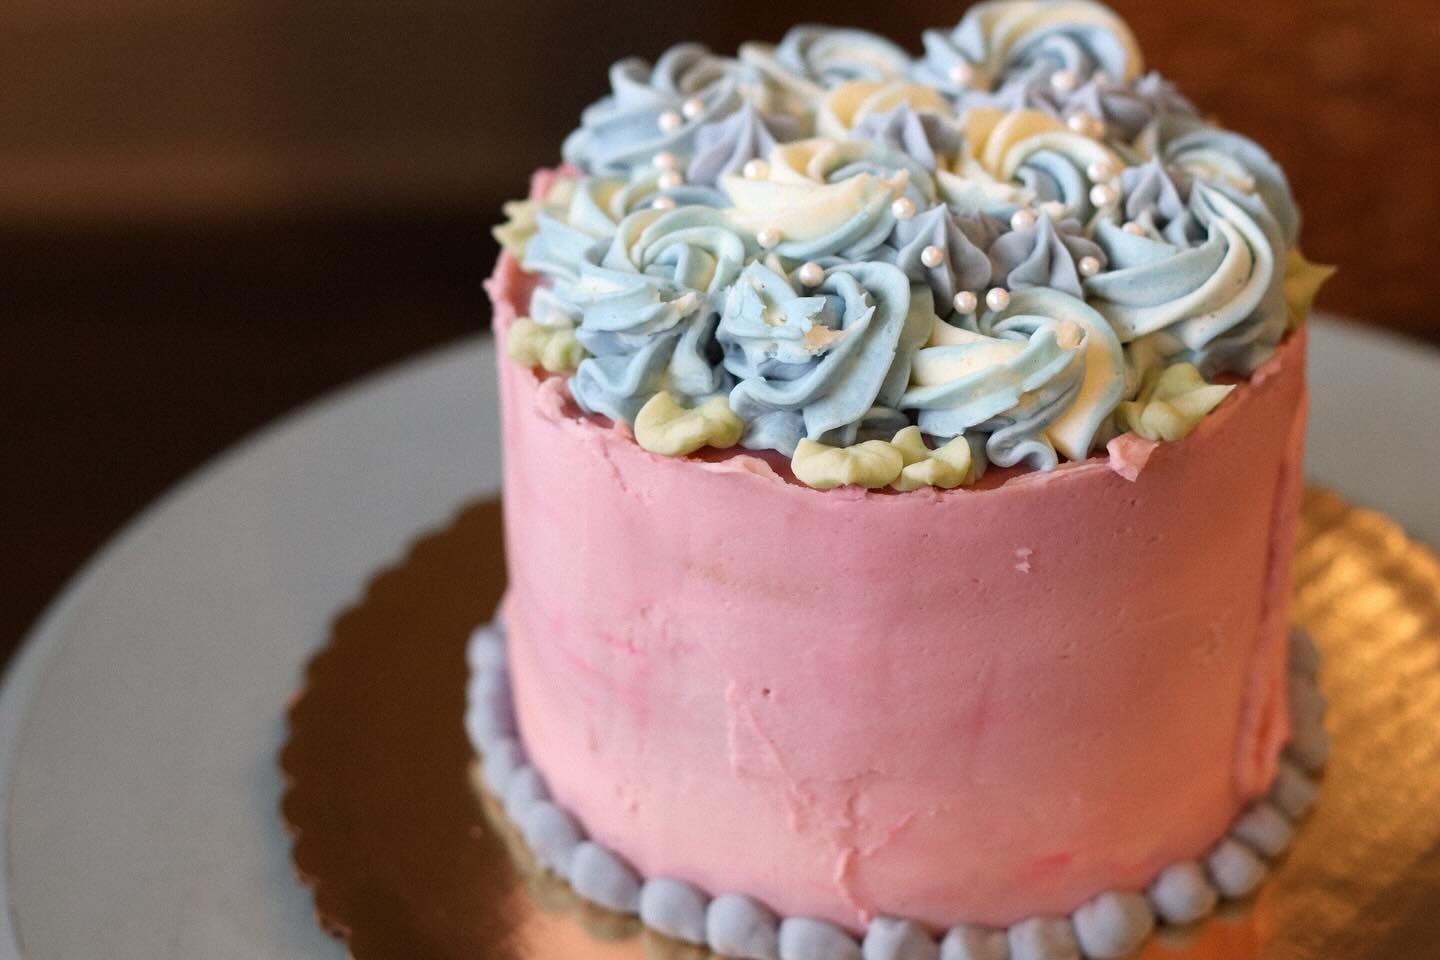 🌺Shugah Hill is here for all your special events! Birthdays, graduations, first communions, baby showers, wedding showers, weddings, you name it 🌺
.
.
#cakedecorating #birthdaycake #weddingcake #cake #bakery #dessert #yum